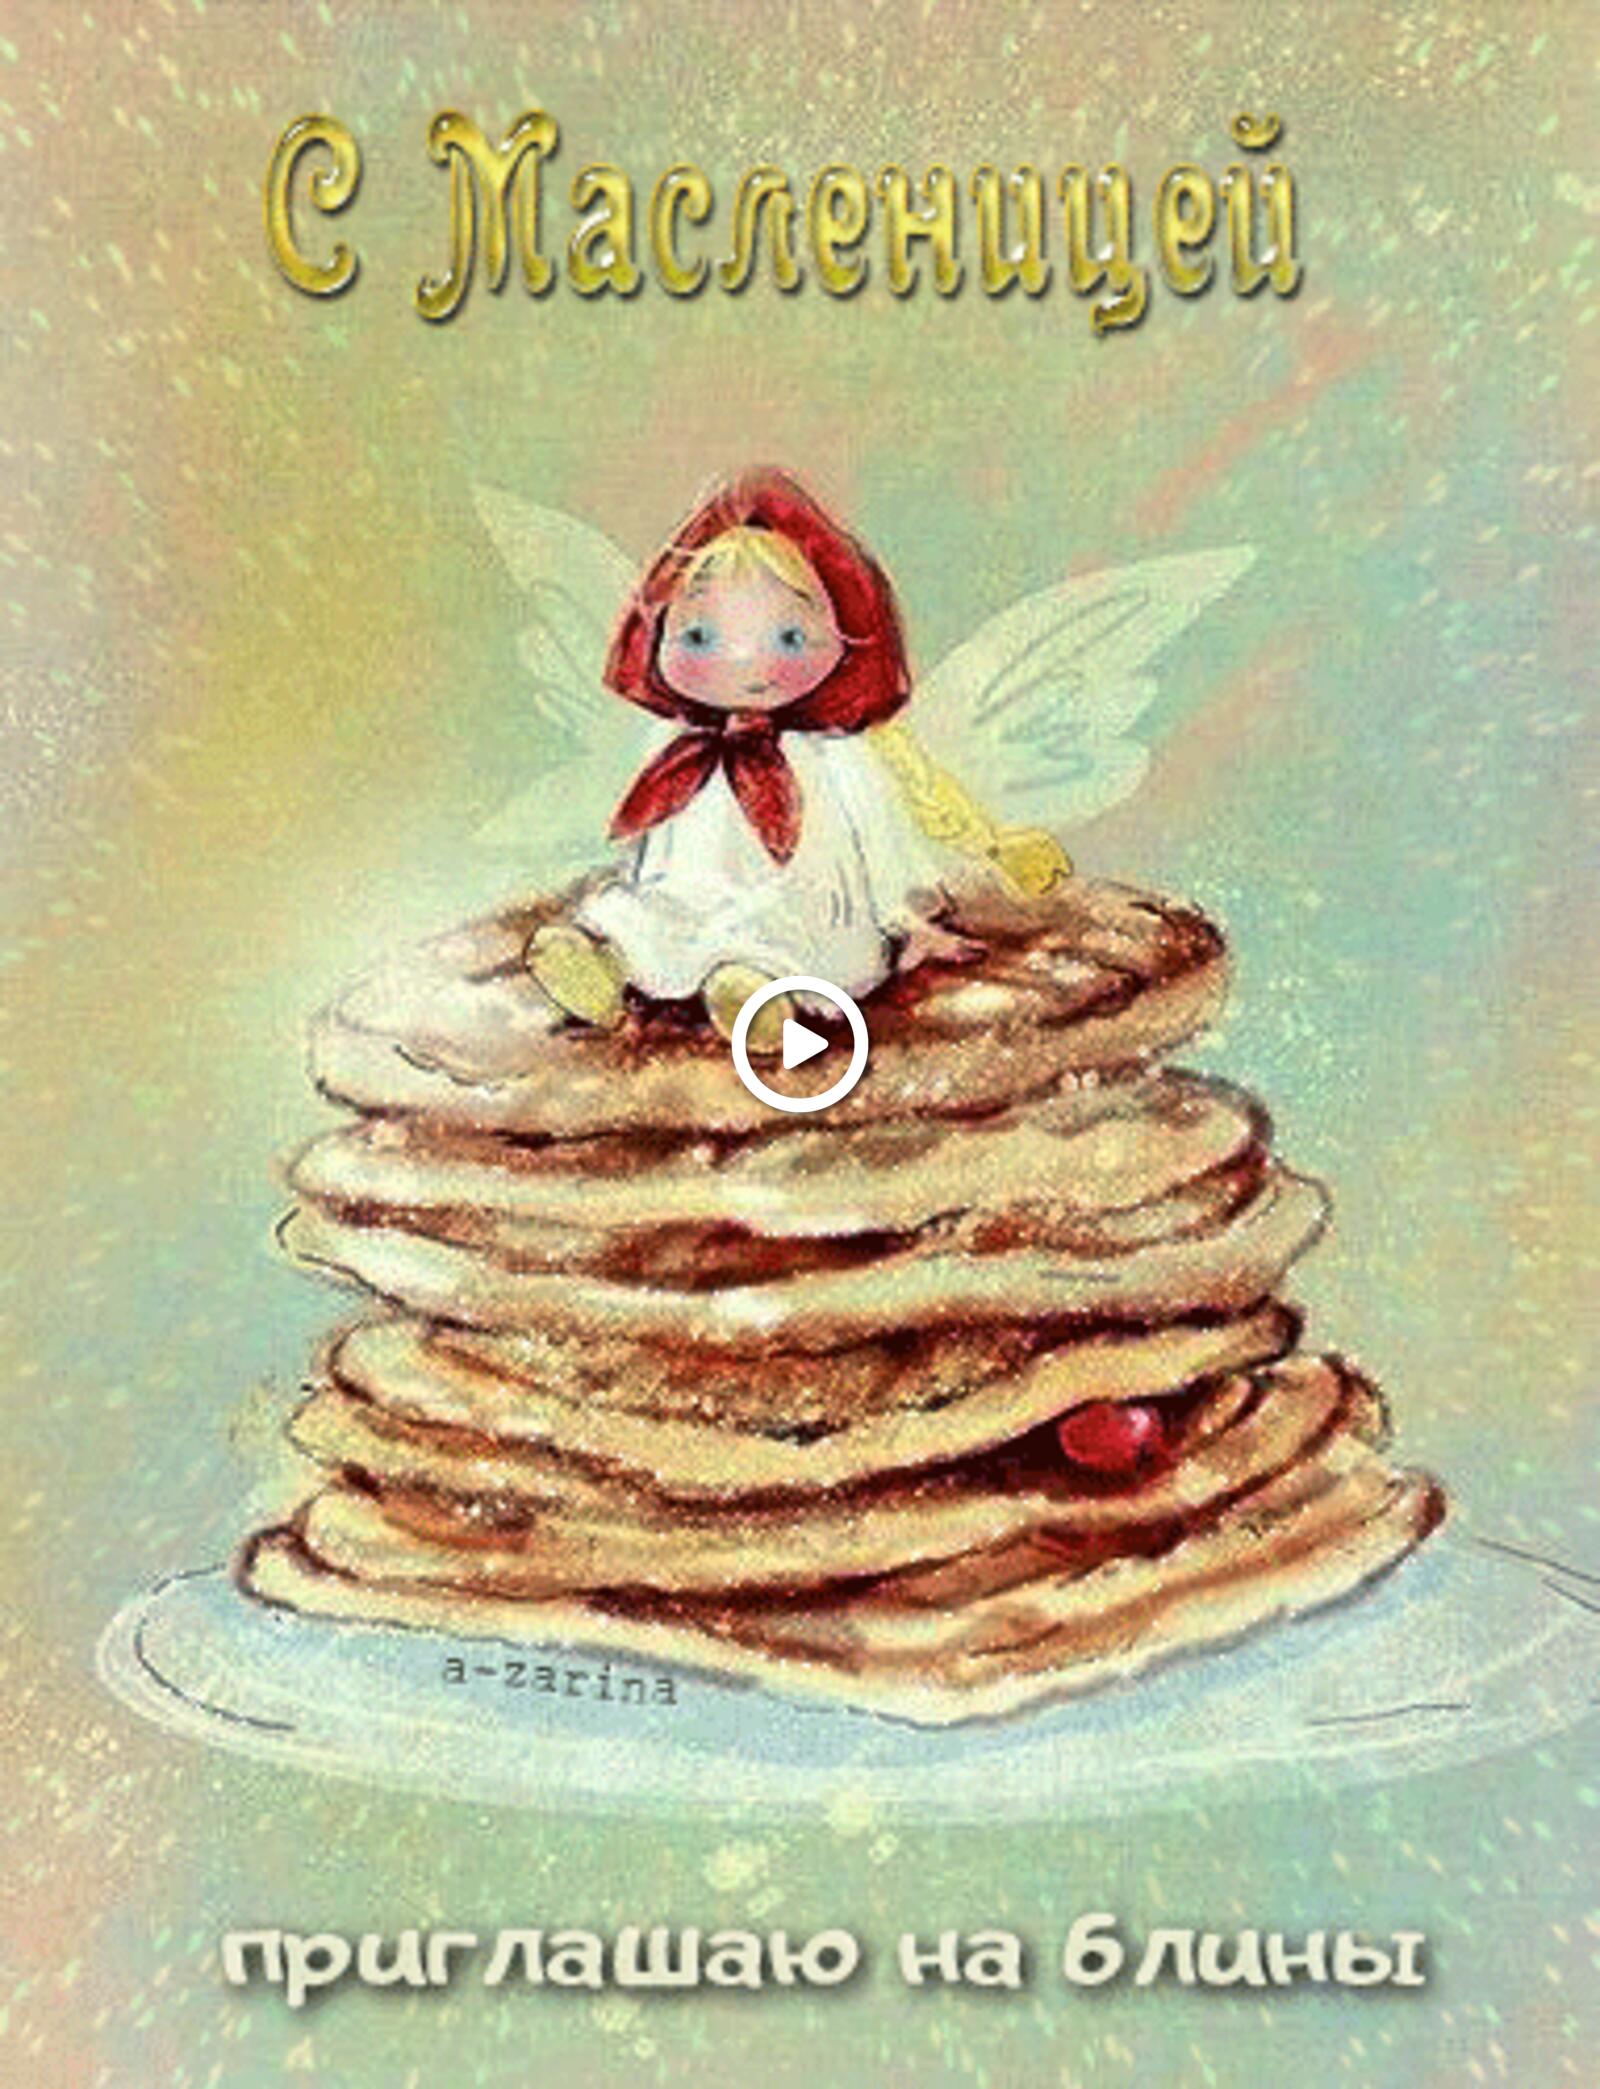 A postcard on the subject of animation shrovetide pancakes for free